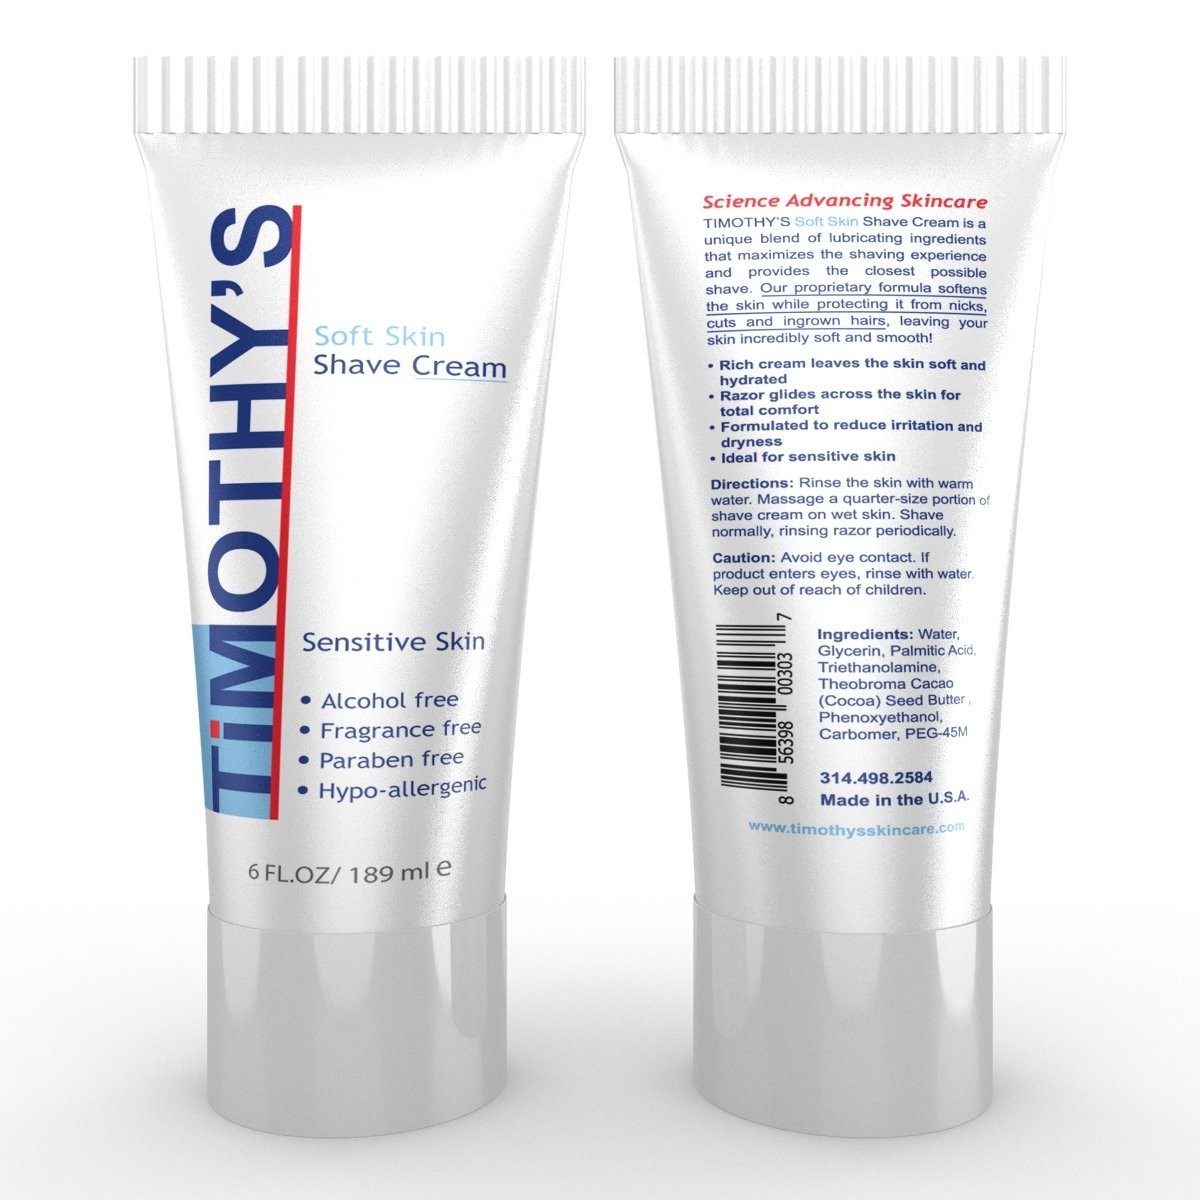 Timothy's Unscented Shave Cream Sensitive Skin Fragrance Free Alcohol Free Paraben Free